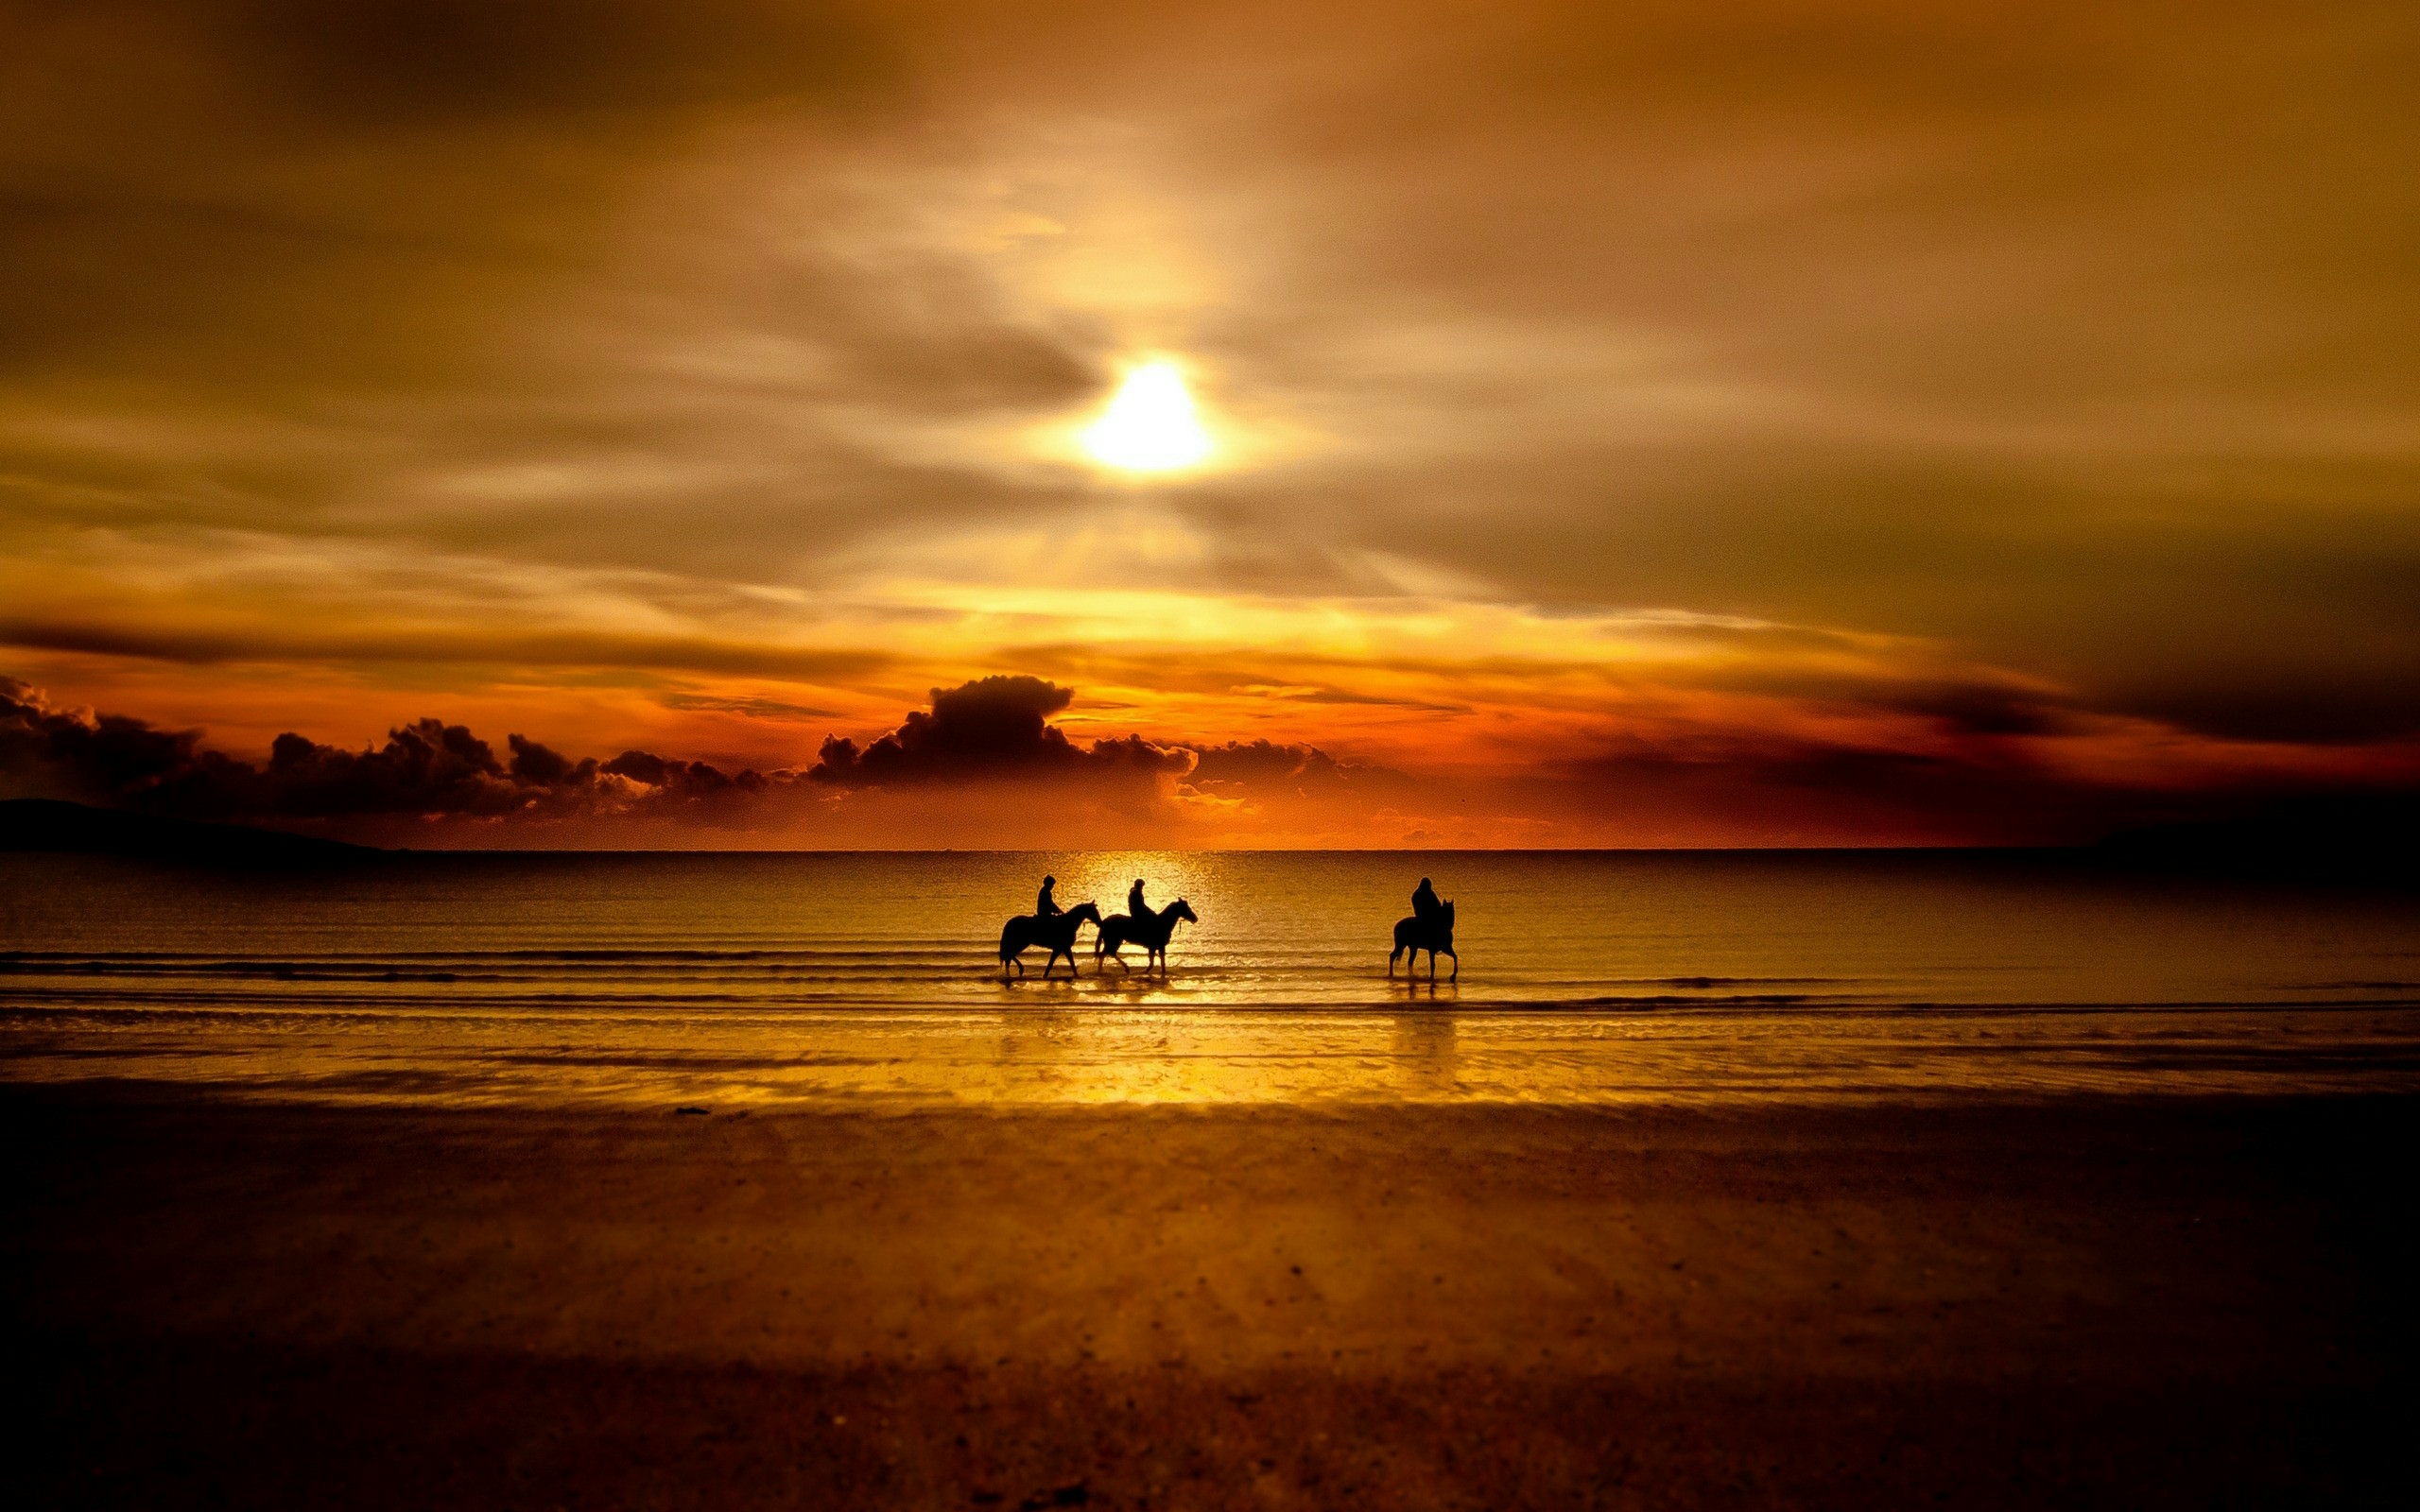 Horse riding wallpapers and images - wallpapers, pictures, photos